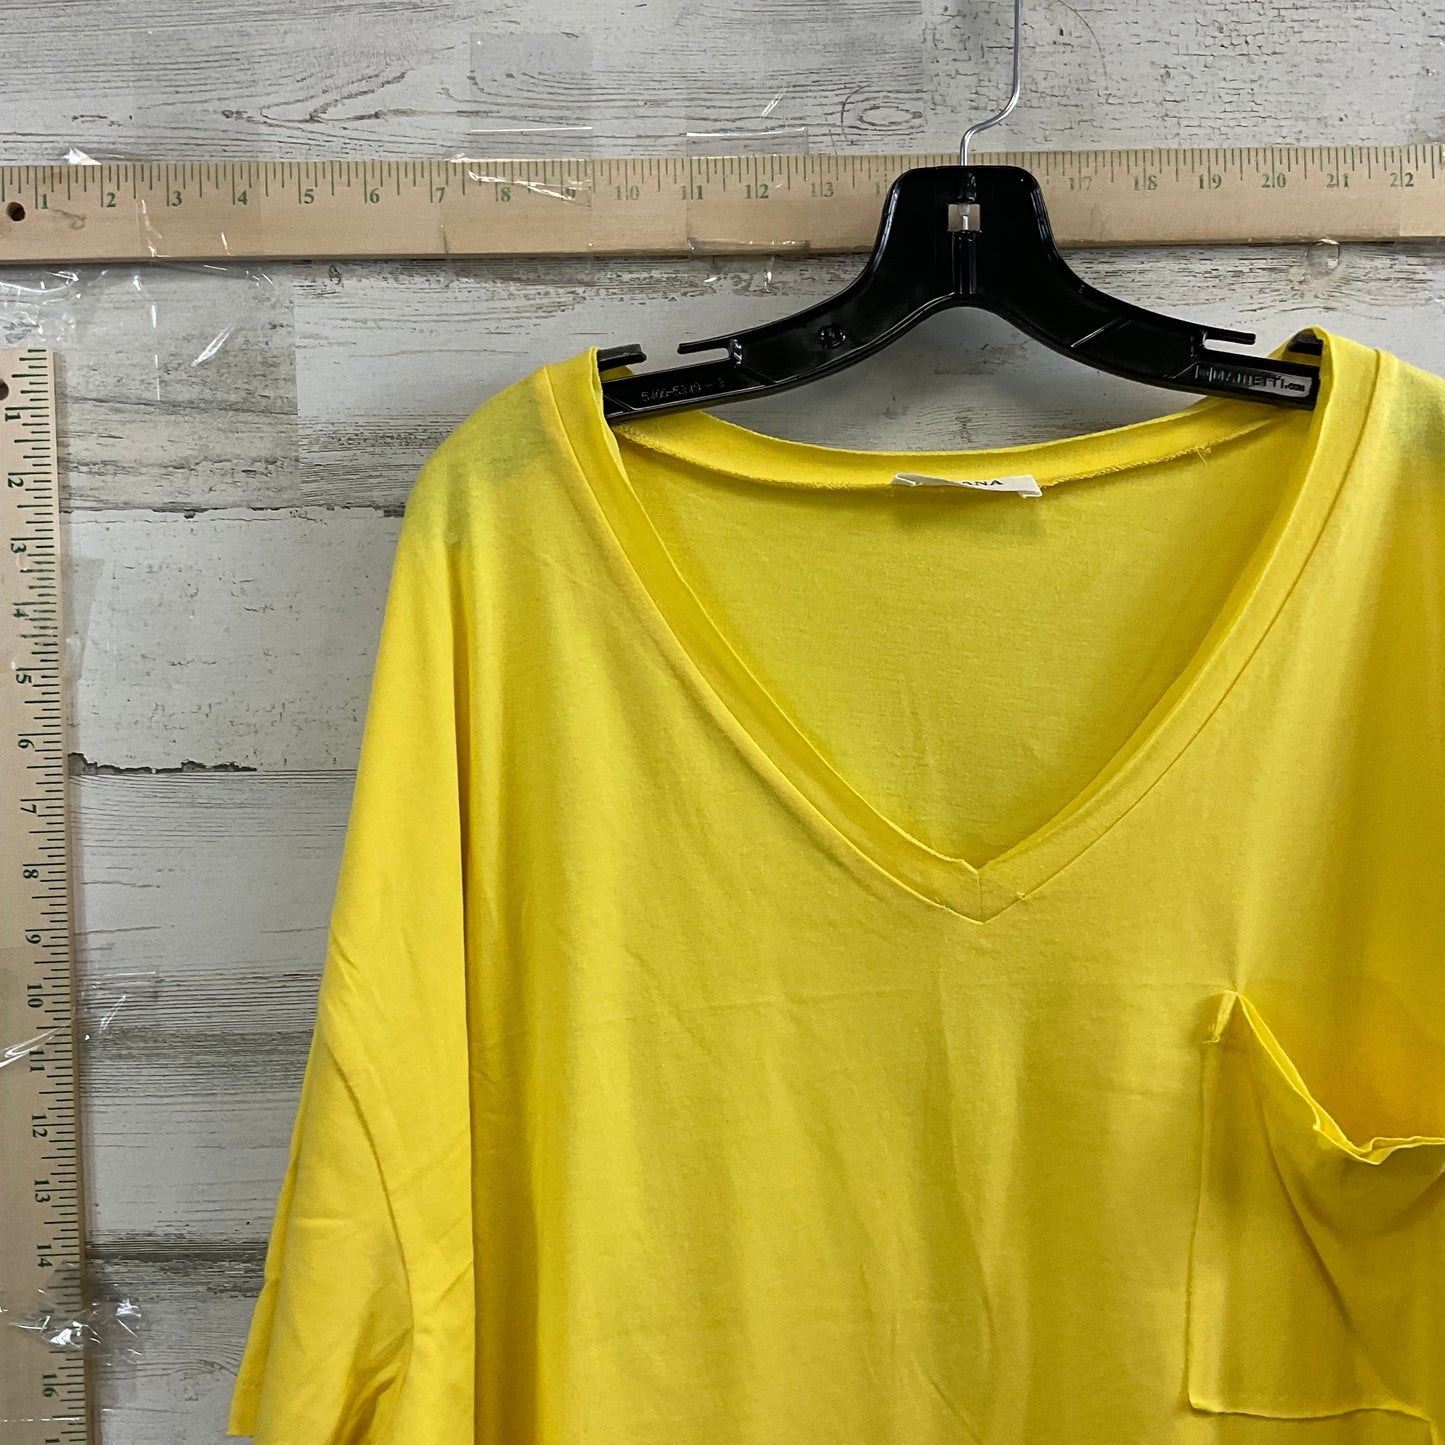 Yellow Top Short Sleeve Zenana Outfitters, Size L